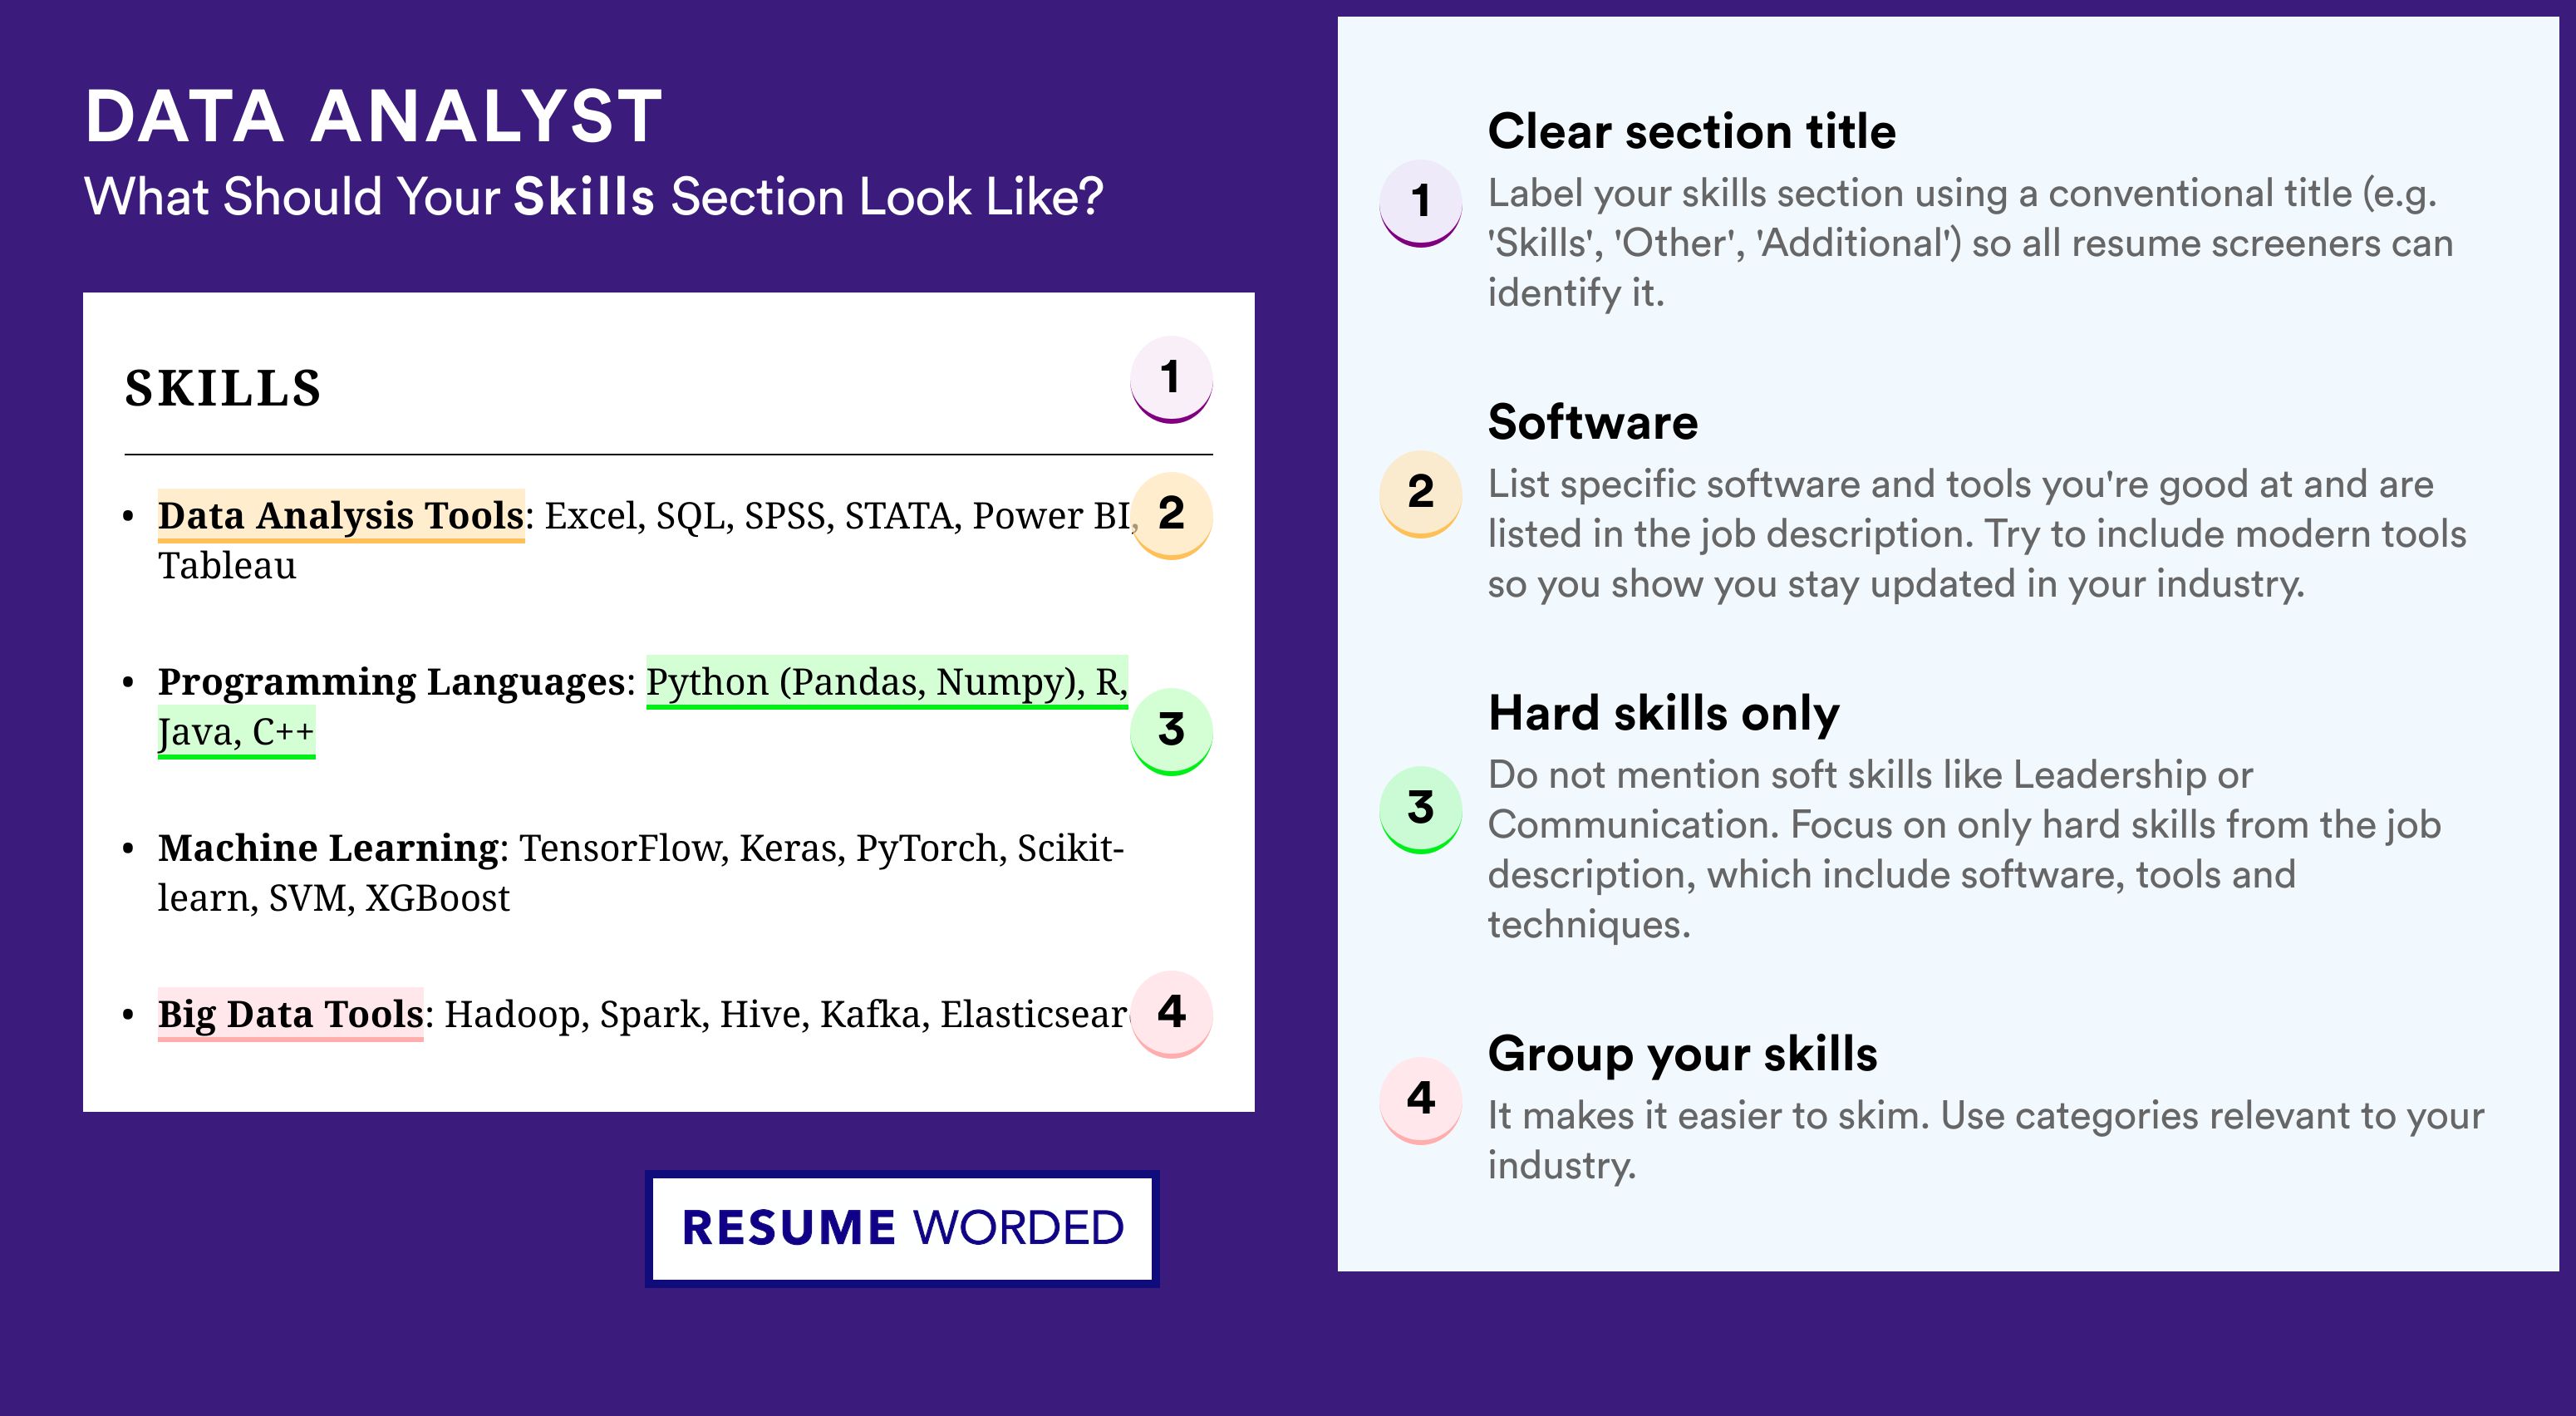 How To Write Your Skills Section - Data Analyst Roles